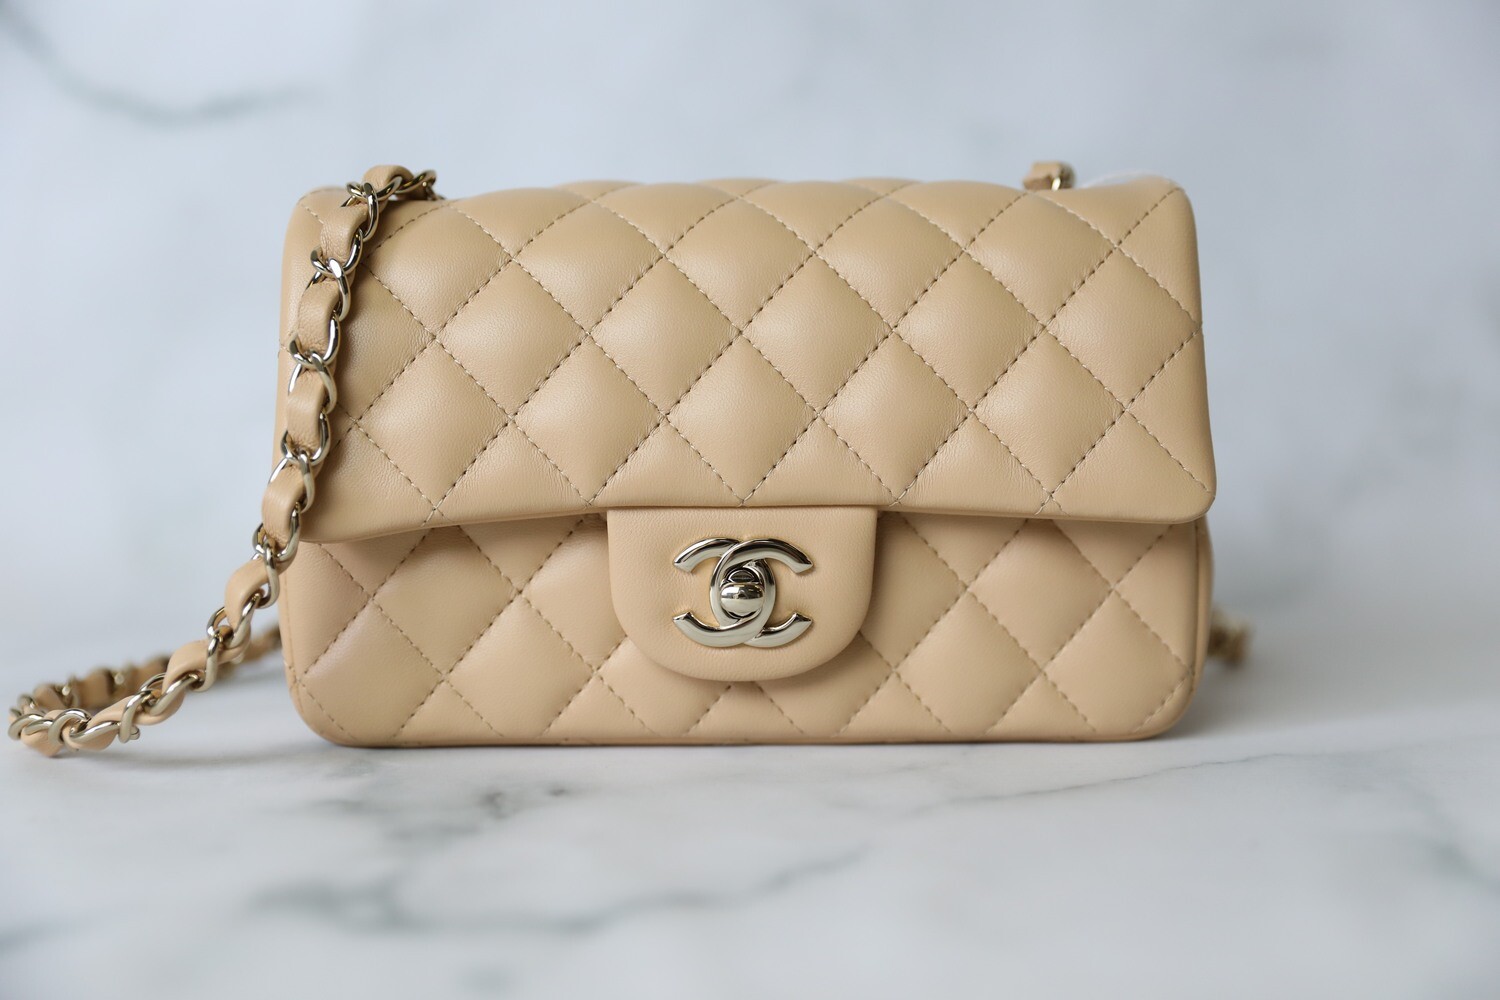 For Sale: ❌ SOLD ❌ Brand New Authentic Chanel 22C Light Beige